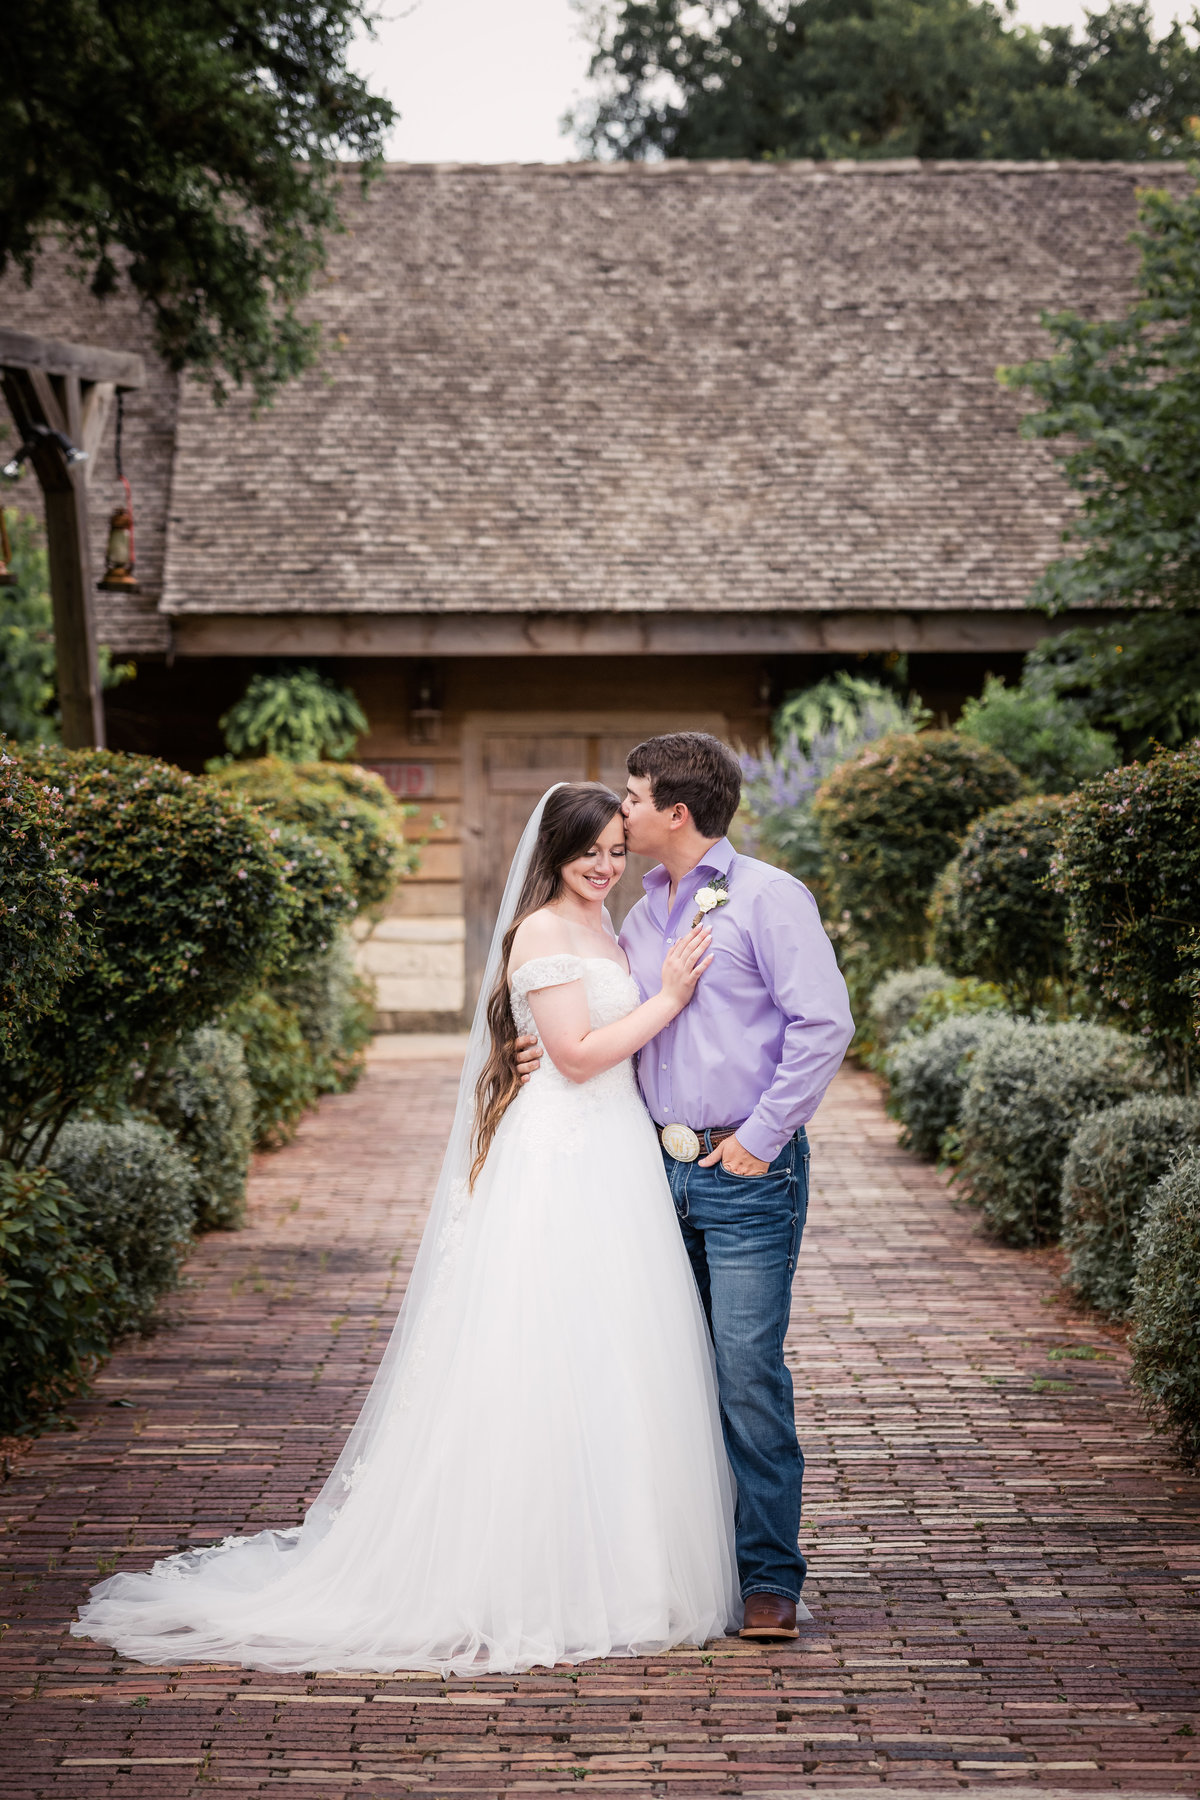 Newlywed Portraits at Texas Old Town Redbud